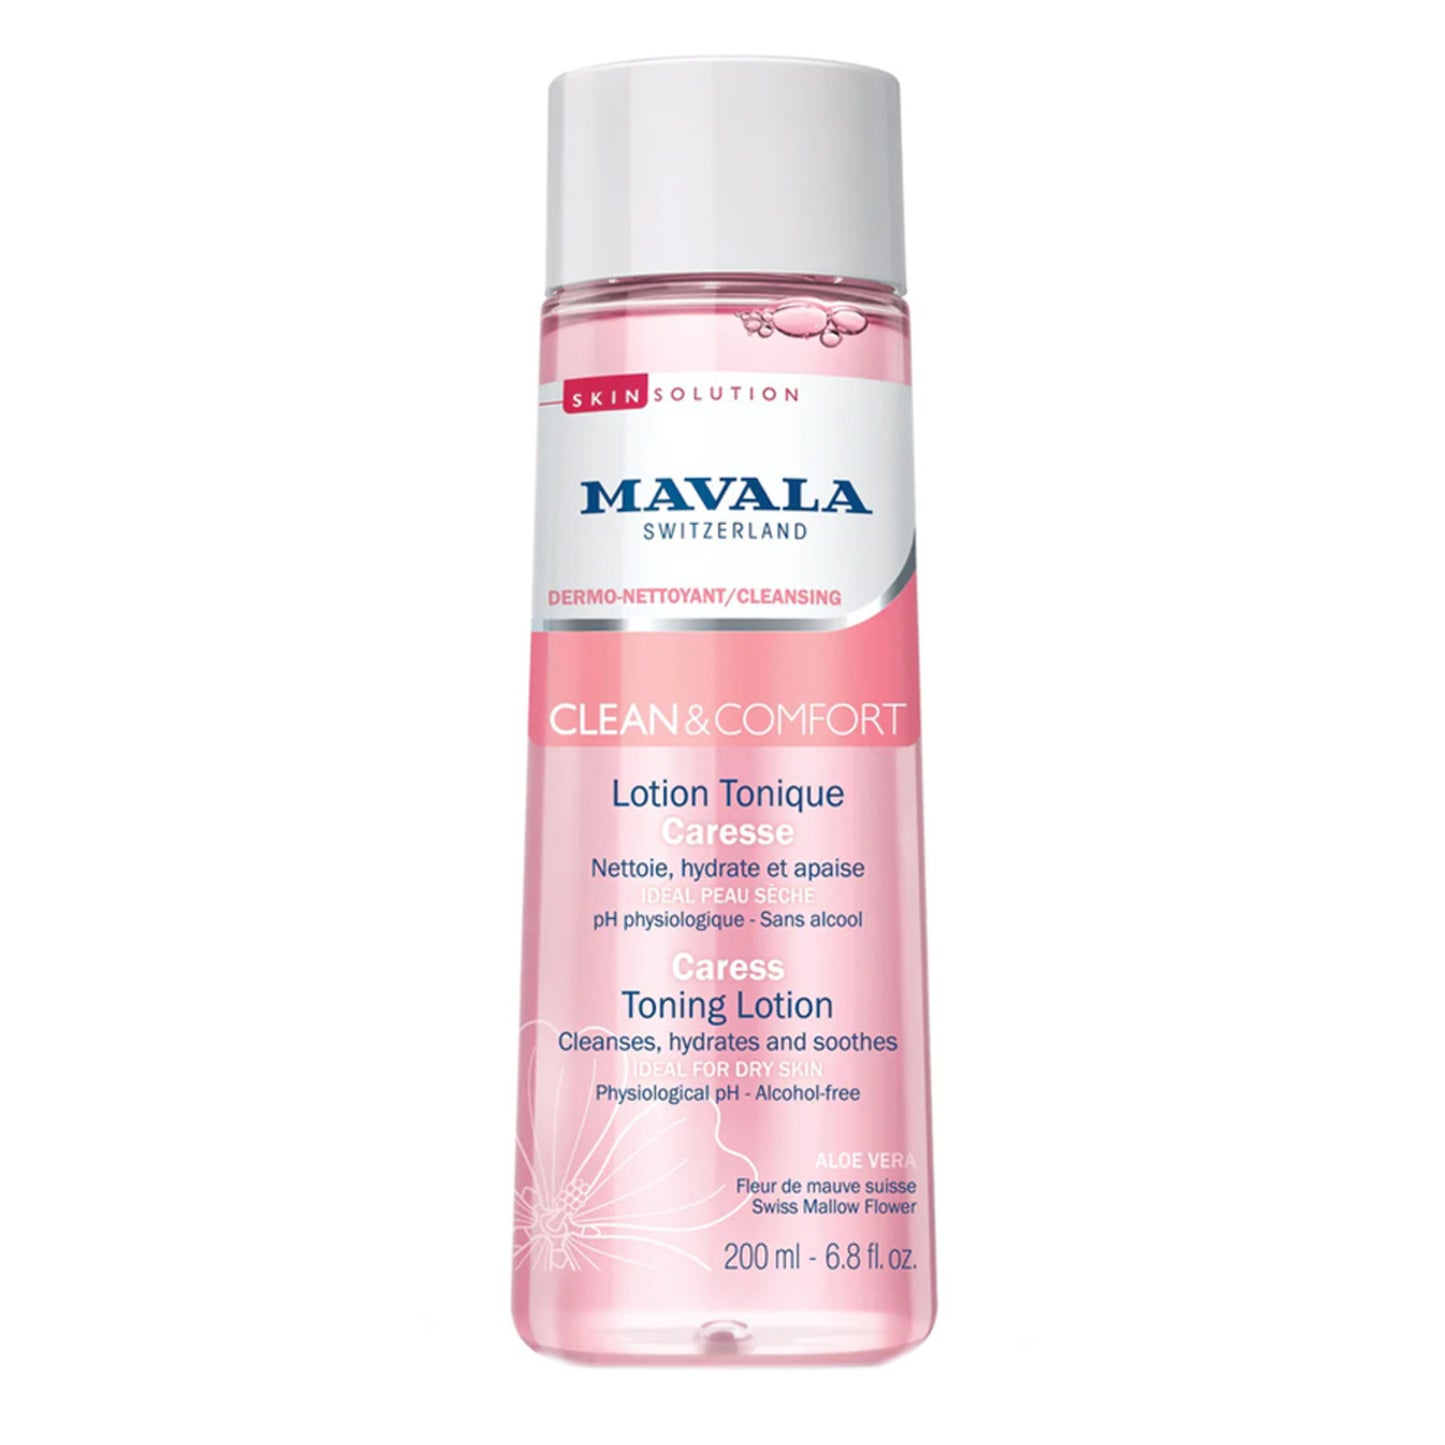 MAVALA Skin Solution Clean and Comfort Caress Toning Lotion